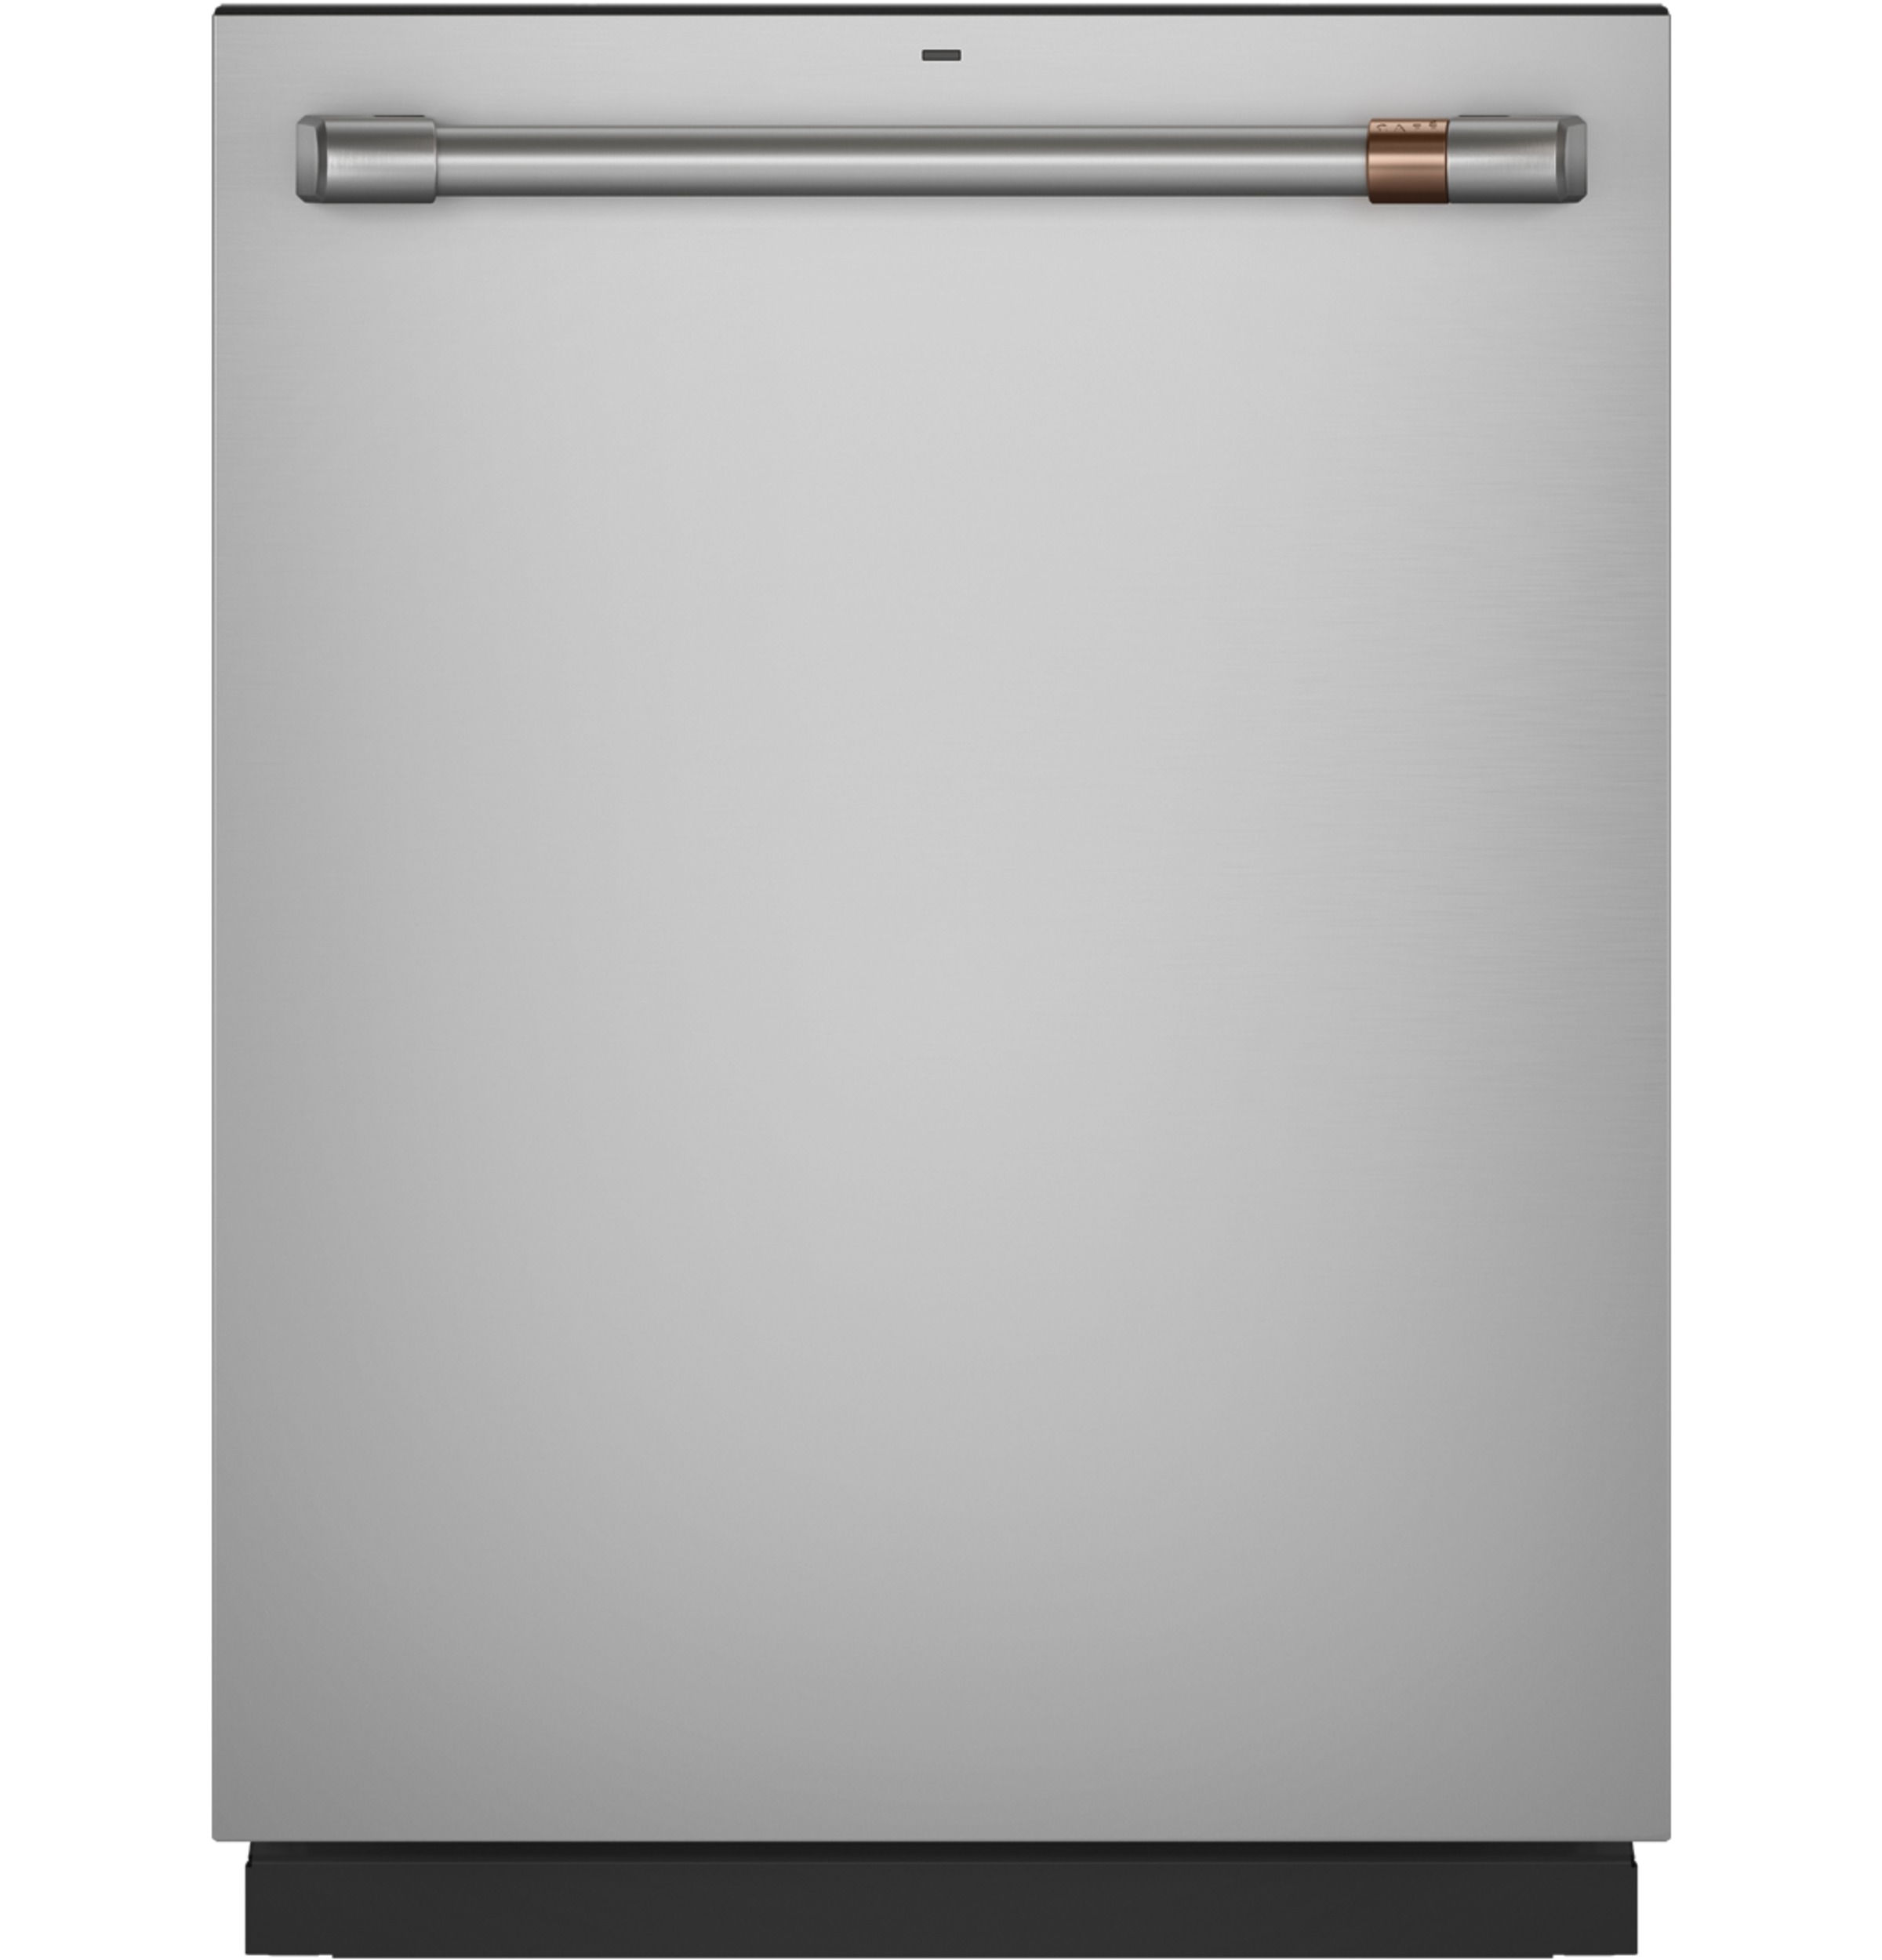 Café™ ENERGY STAR® Stainless Steel Interior Dishwasher with Sanitize and Ultra Wash & Dry